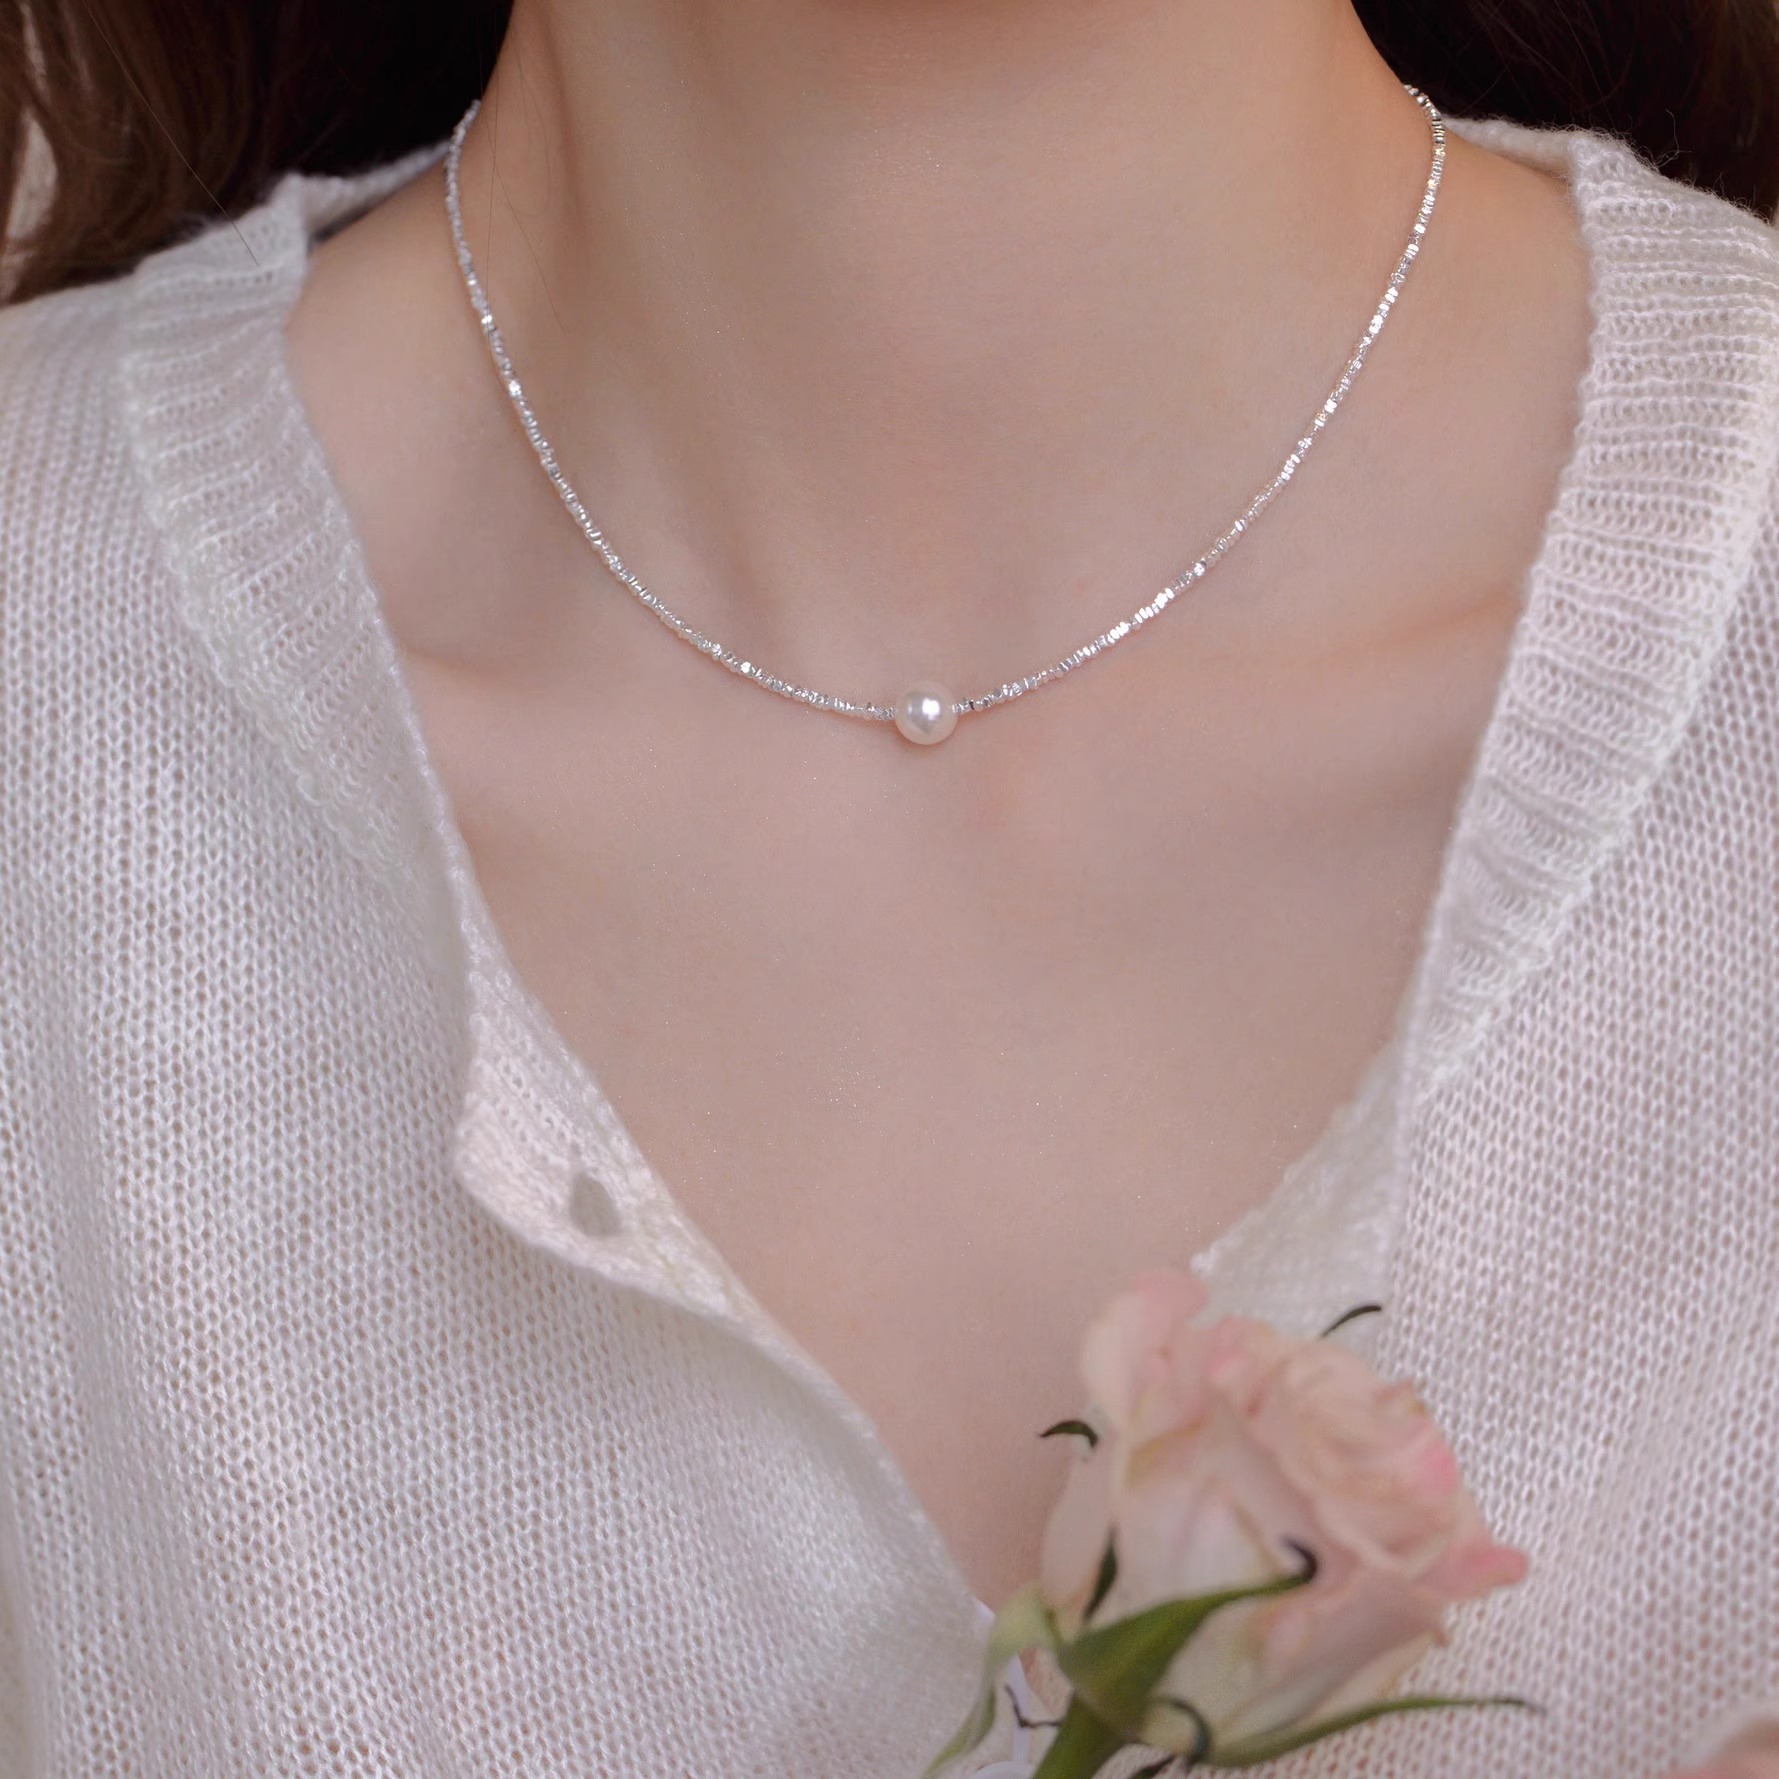 Shattered Silver Twins Shattered Silver Pearl Necklace with Light Luxury and niche Design collarbone Chain 2023 New Popular High end Neckchain